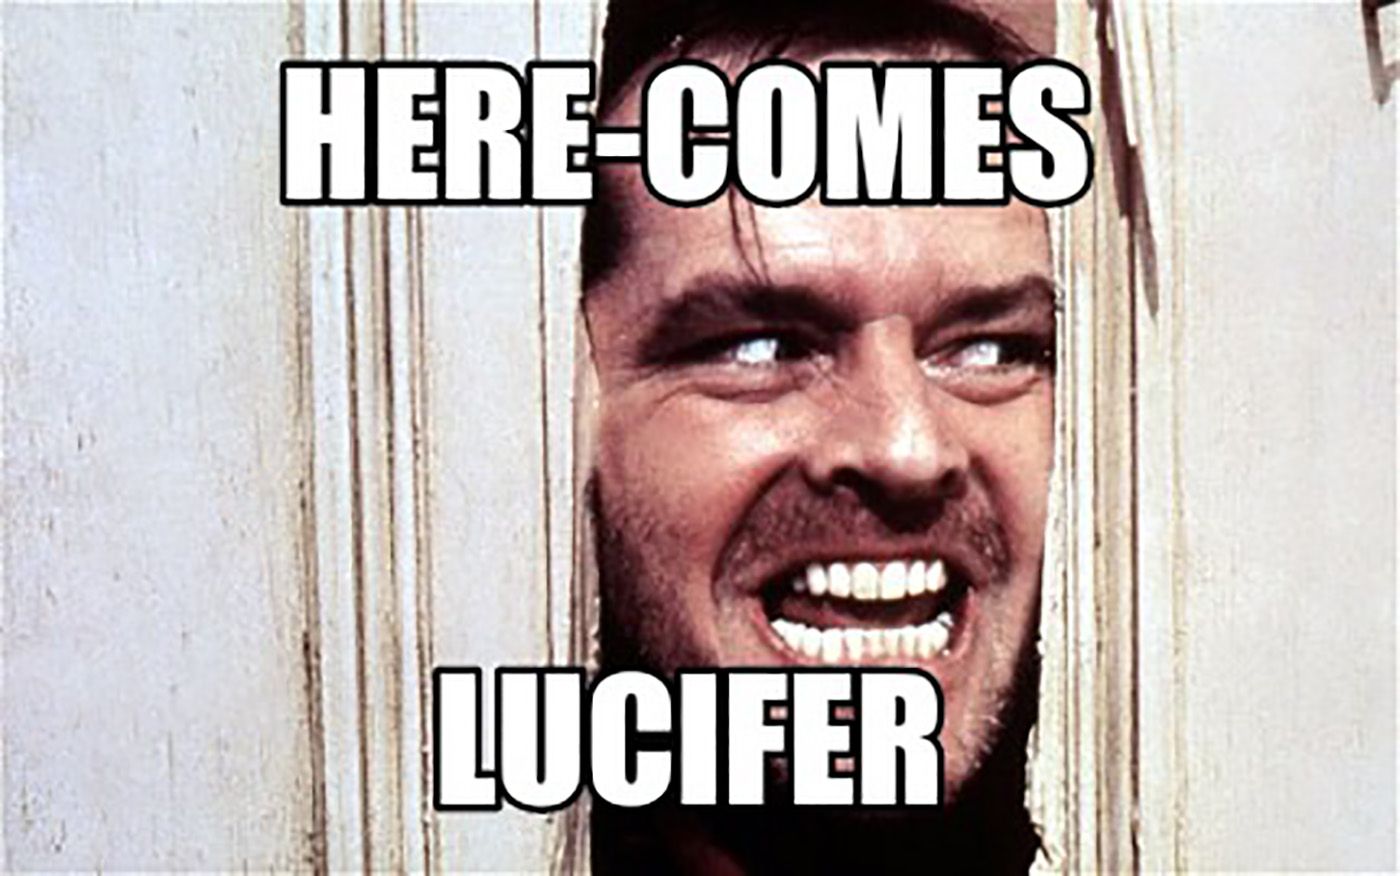 The famous poster of Jack Nicholson from The Shining with a caption over his face relating to Lucifer.